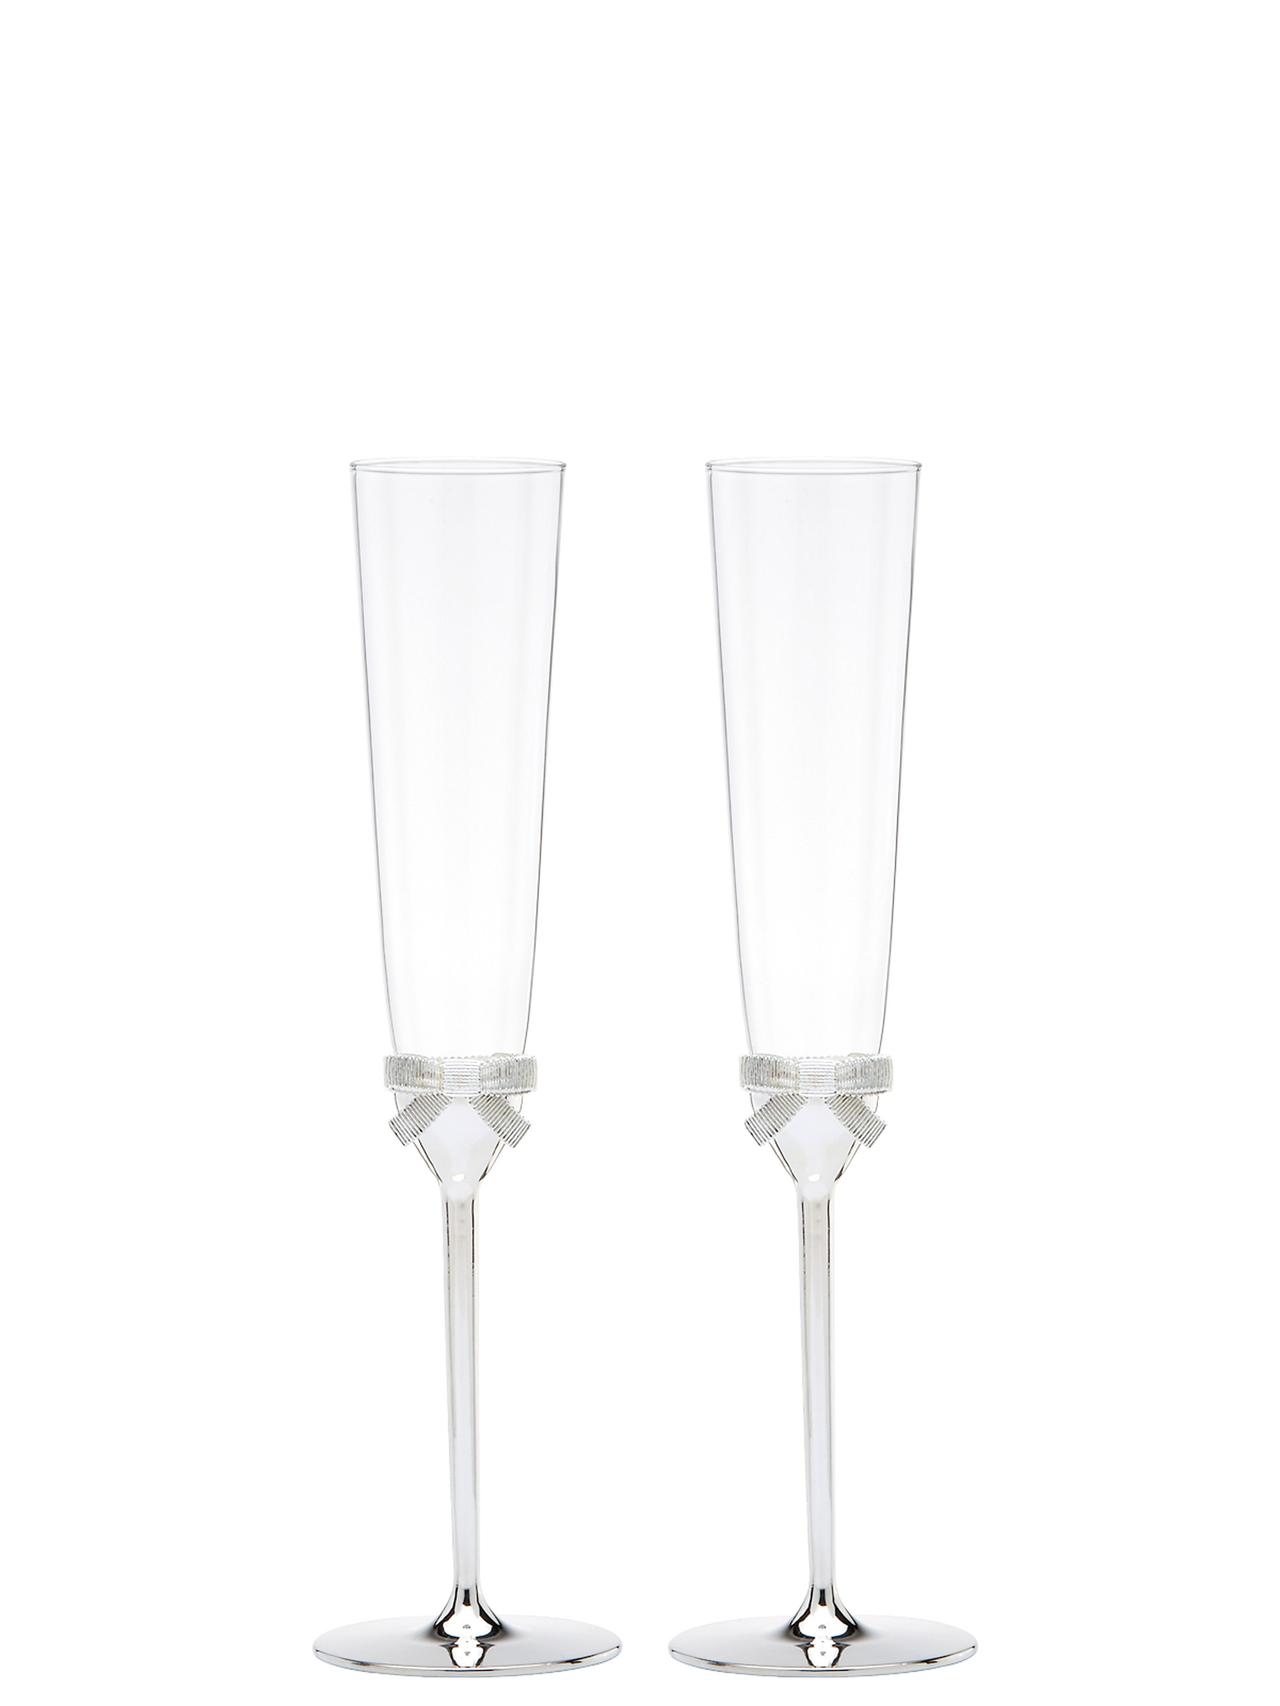 Wedding champagne flutes with silver bow detail